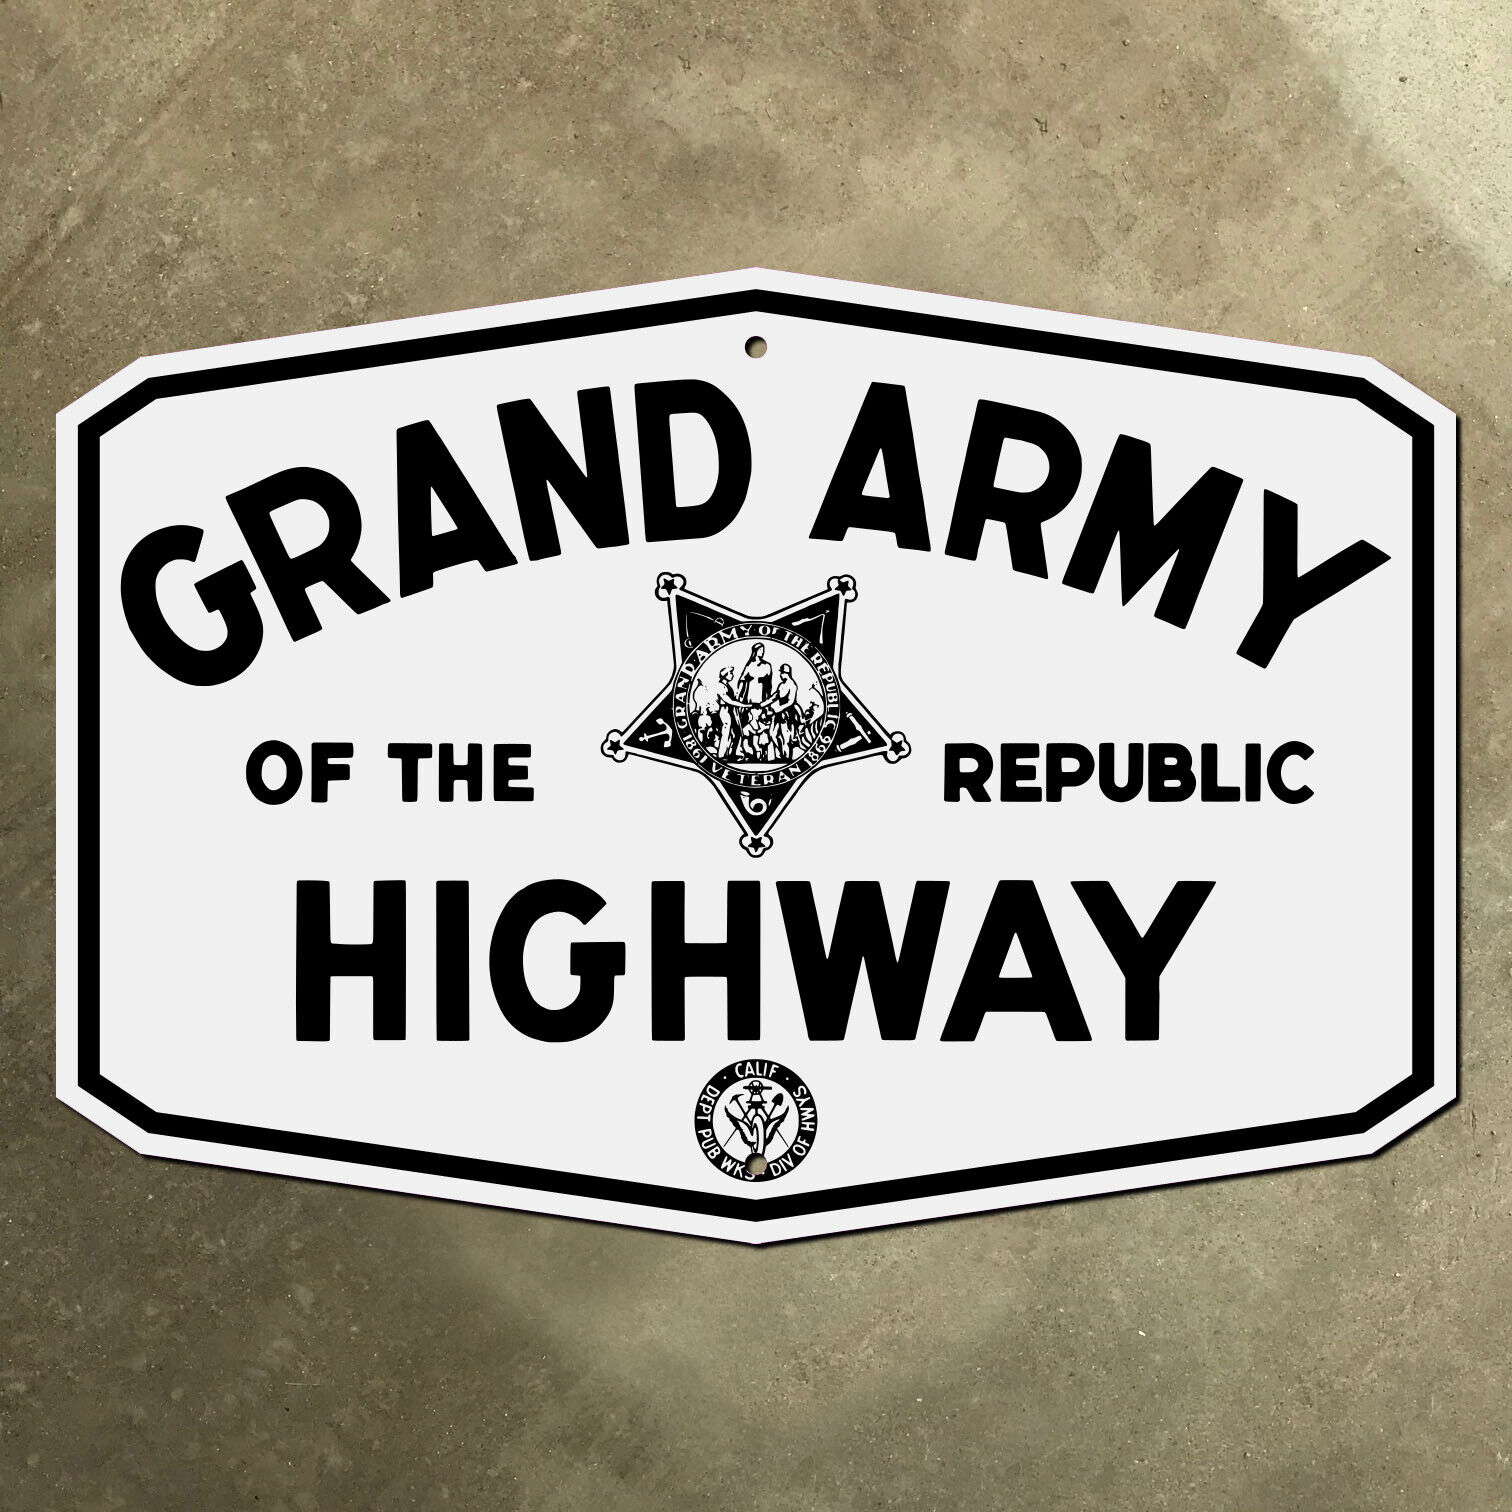 California Grand Army of the Republic Highway road sign 1956 US route 6